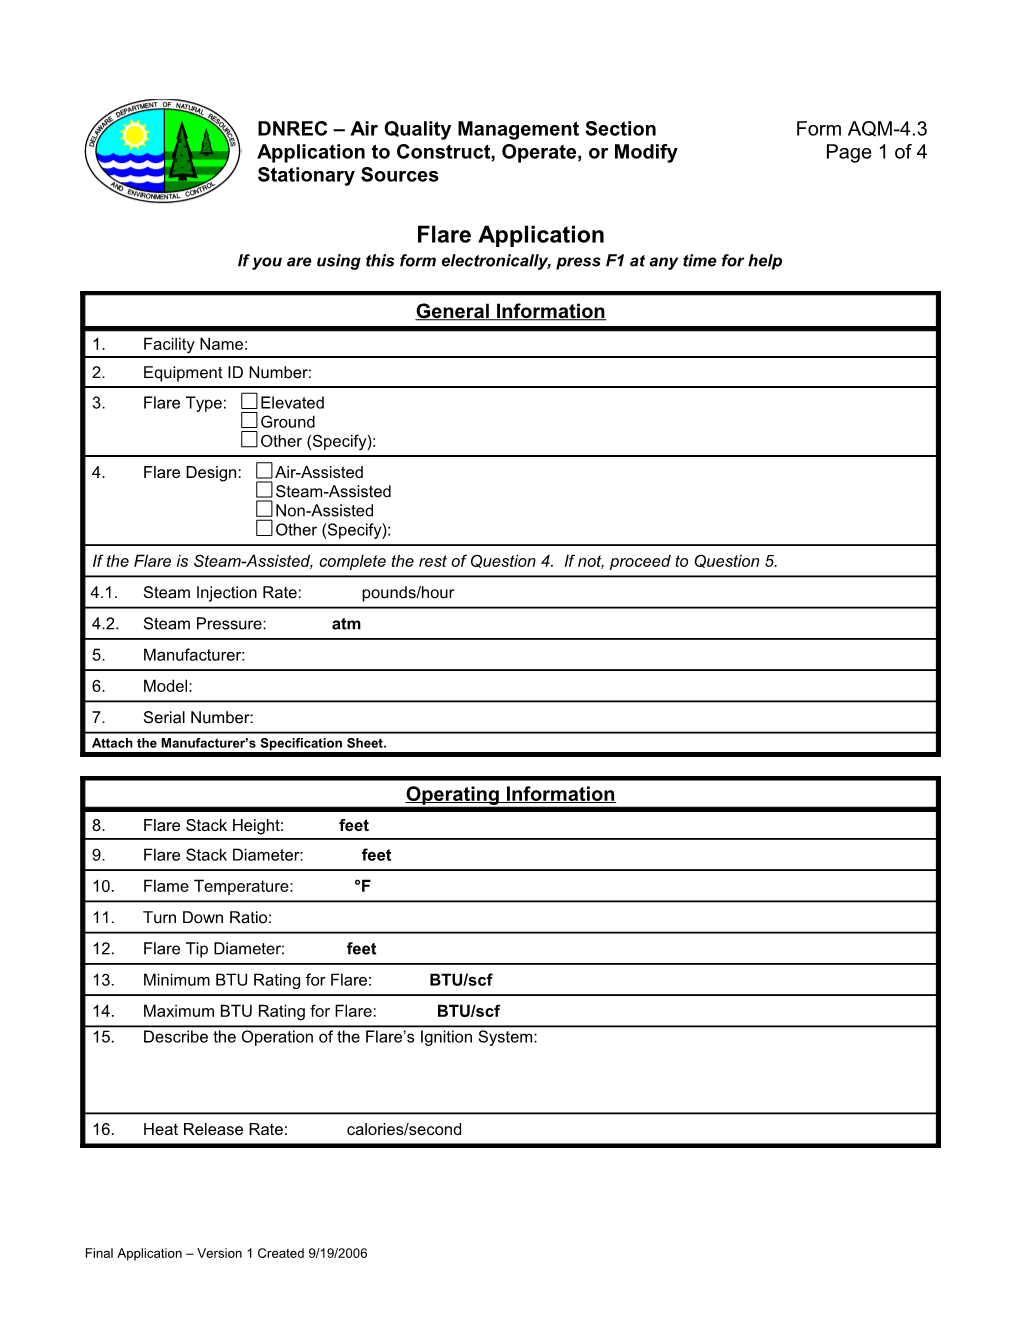 Final Application Version 1 Created 9/19/2006